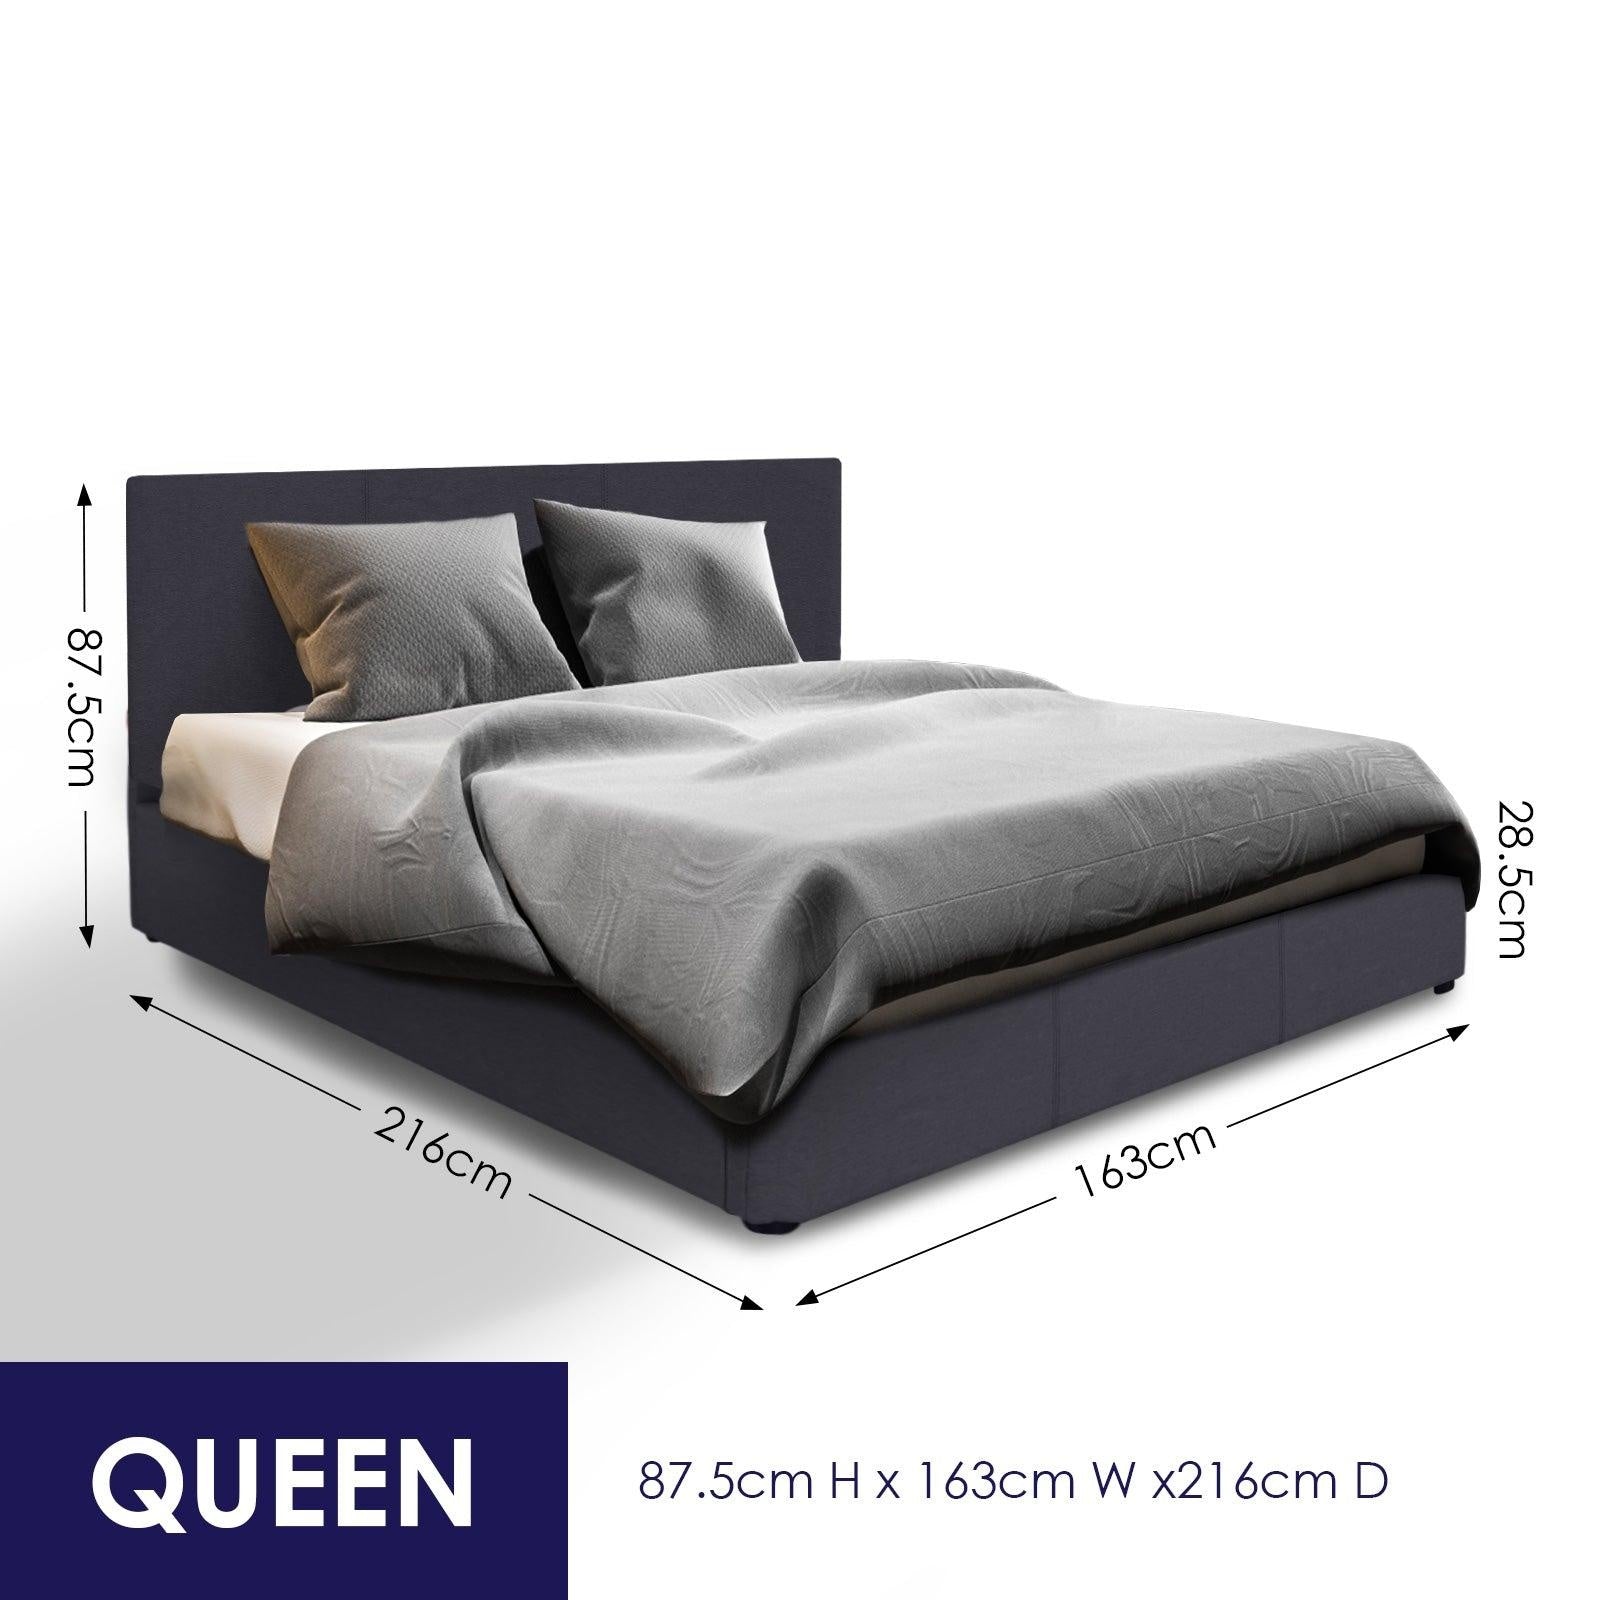 Milano Luxury Gas Lift Bed Frame And Headboard Queen Black Deals499